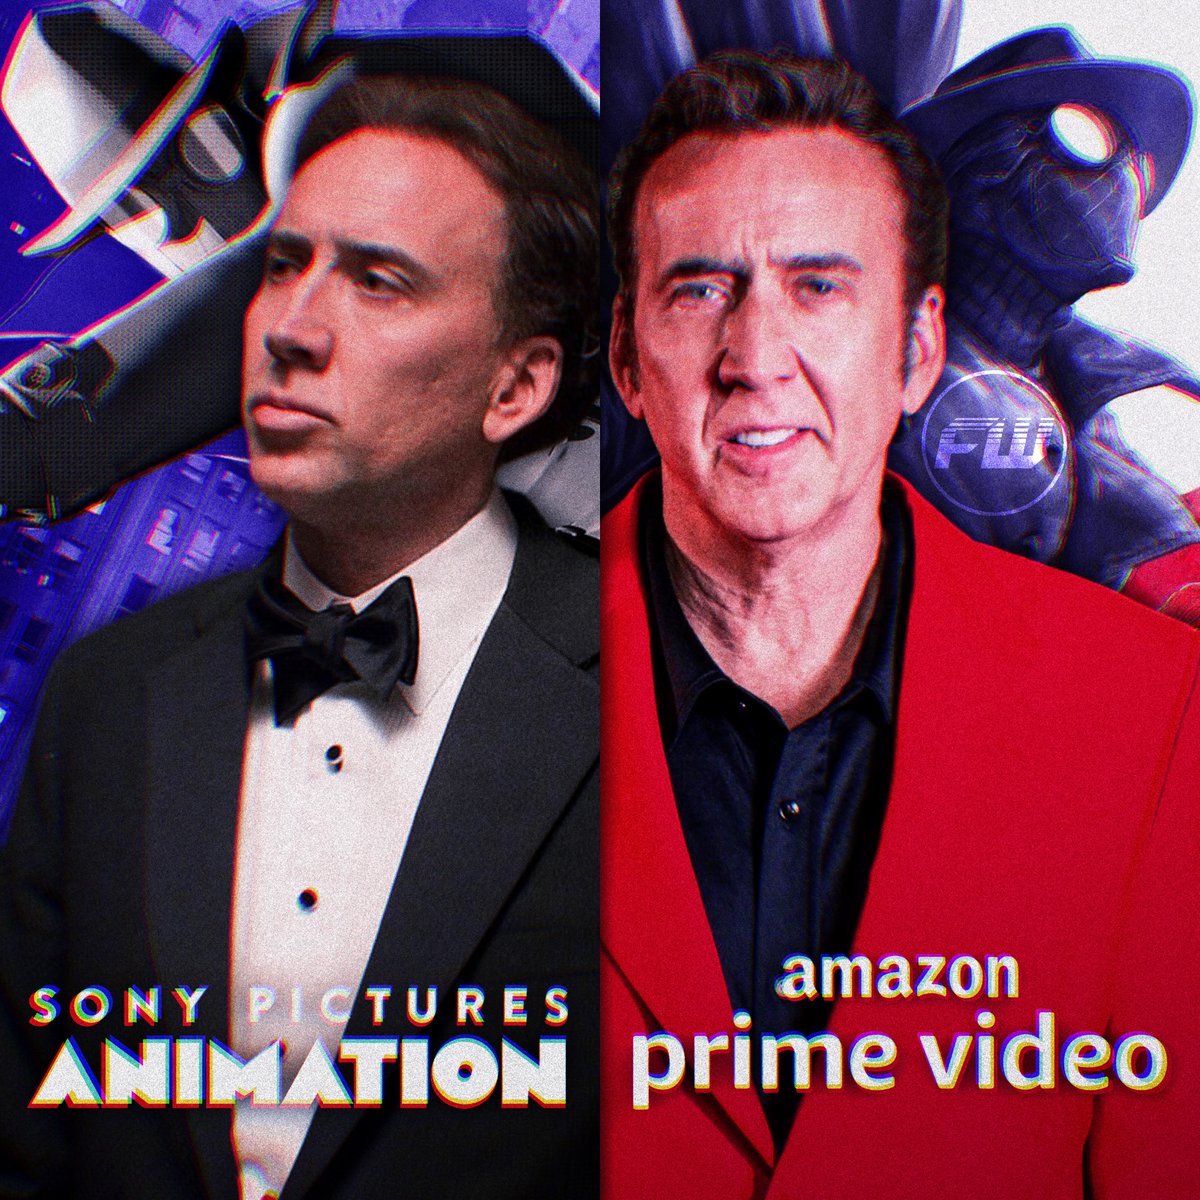 Nicolas Cage will once again play Spider-Man Noir, but this time in live-action. Synopsis: The story of an aging and down on his luck private investigator in 1930s New York, who is forced to grapple with his past life as the city’s one and only superhero. NOIR, starring Nicolas…